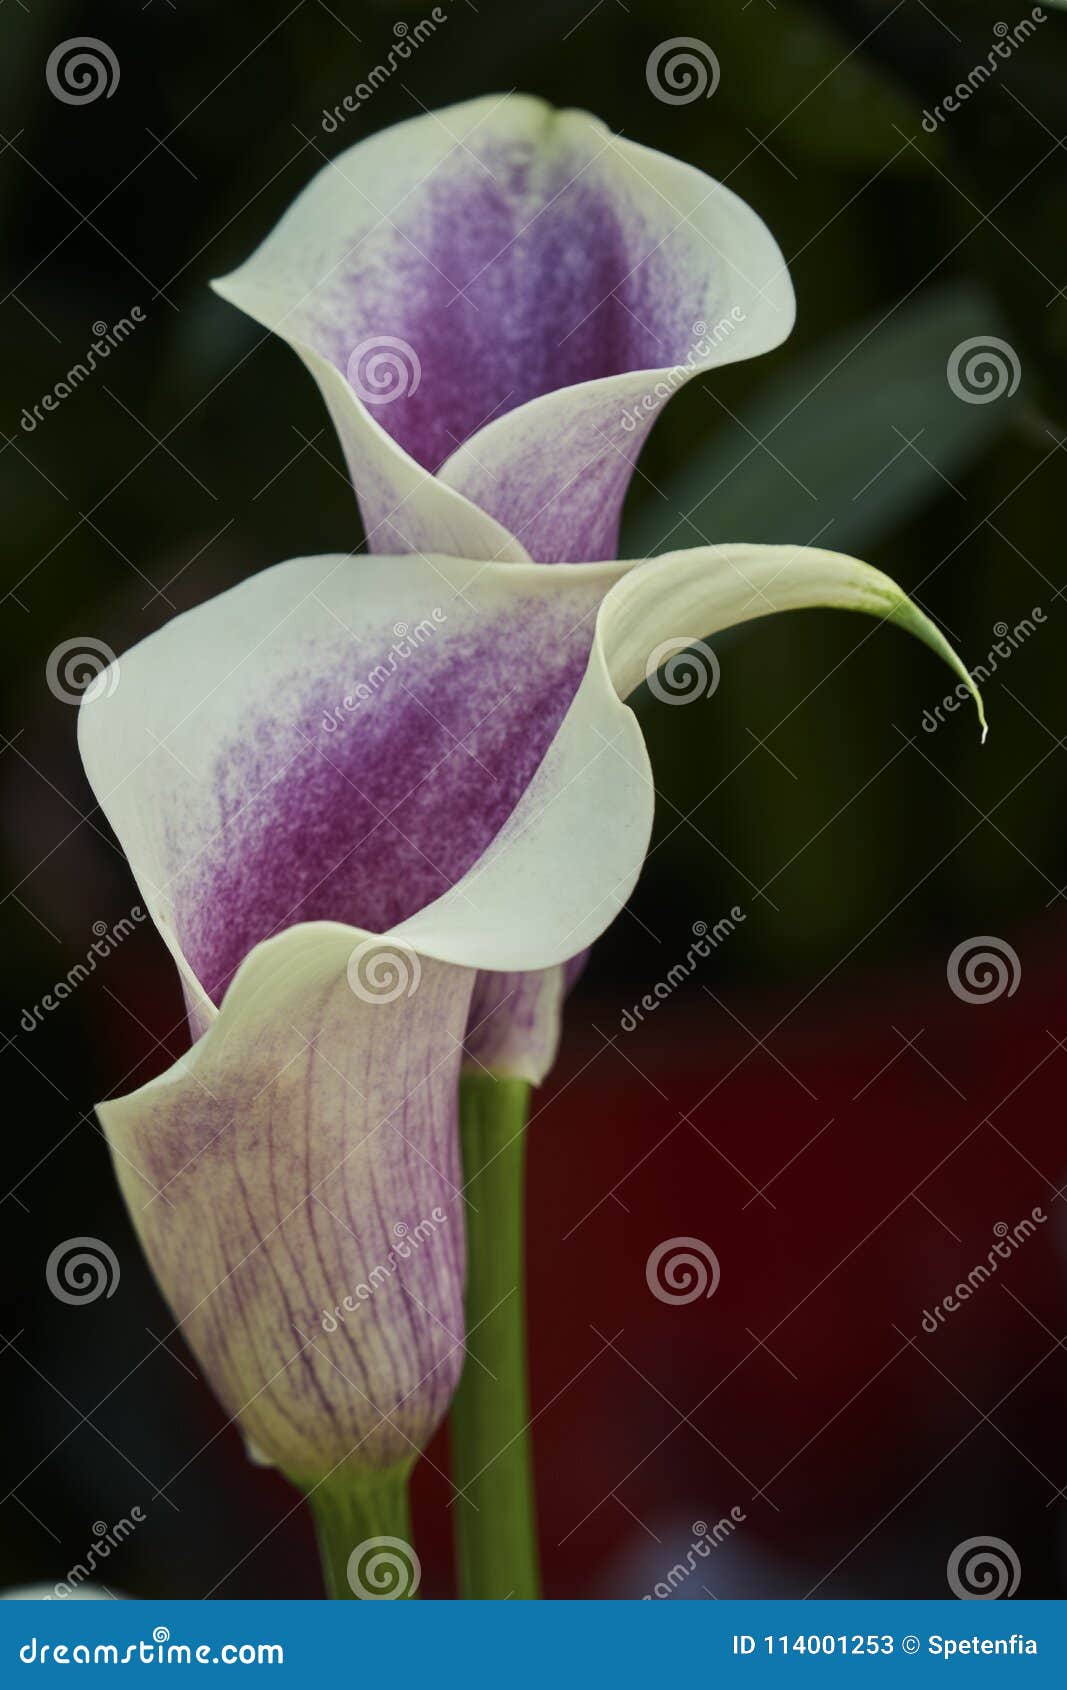 Colored Calla Lily In Bloom Stock Image - Image of bloom, nature: 114001253